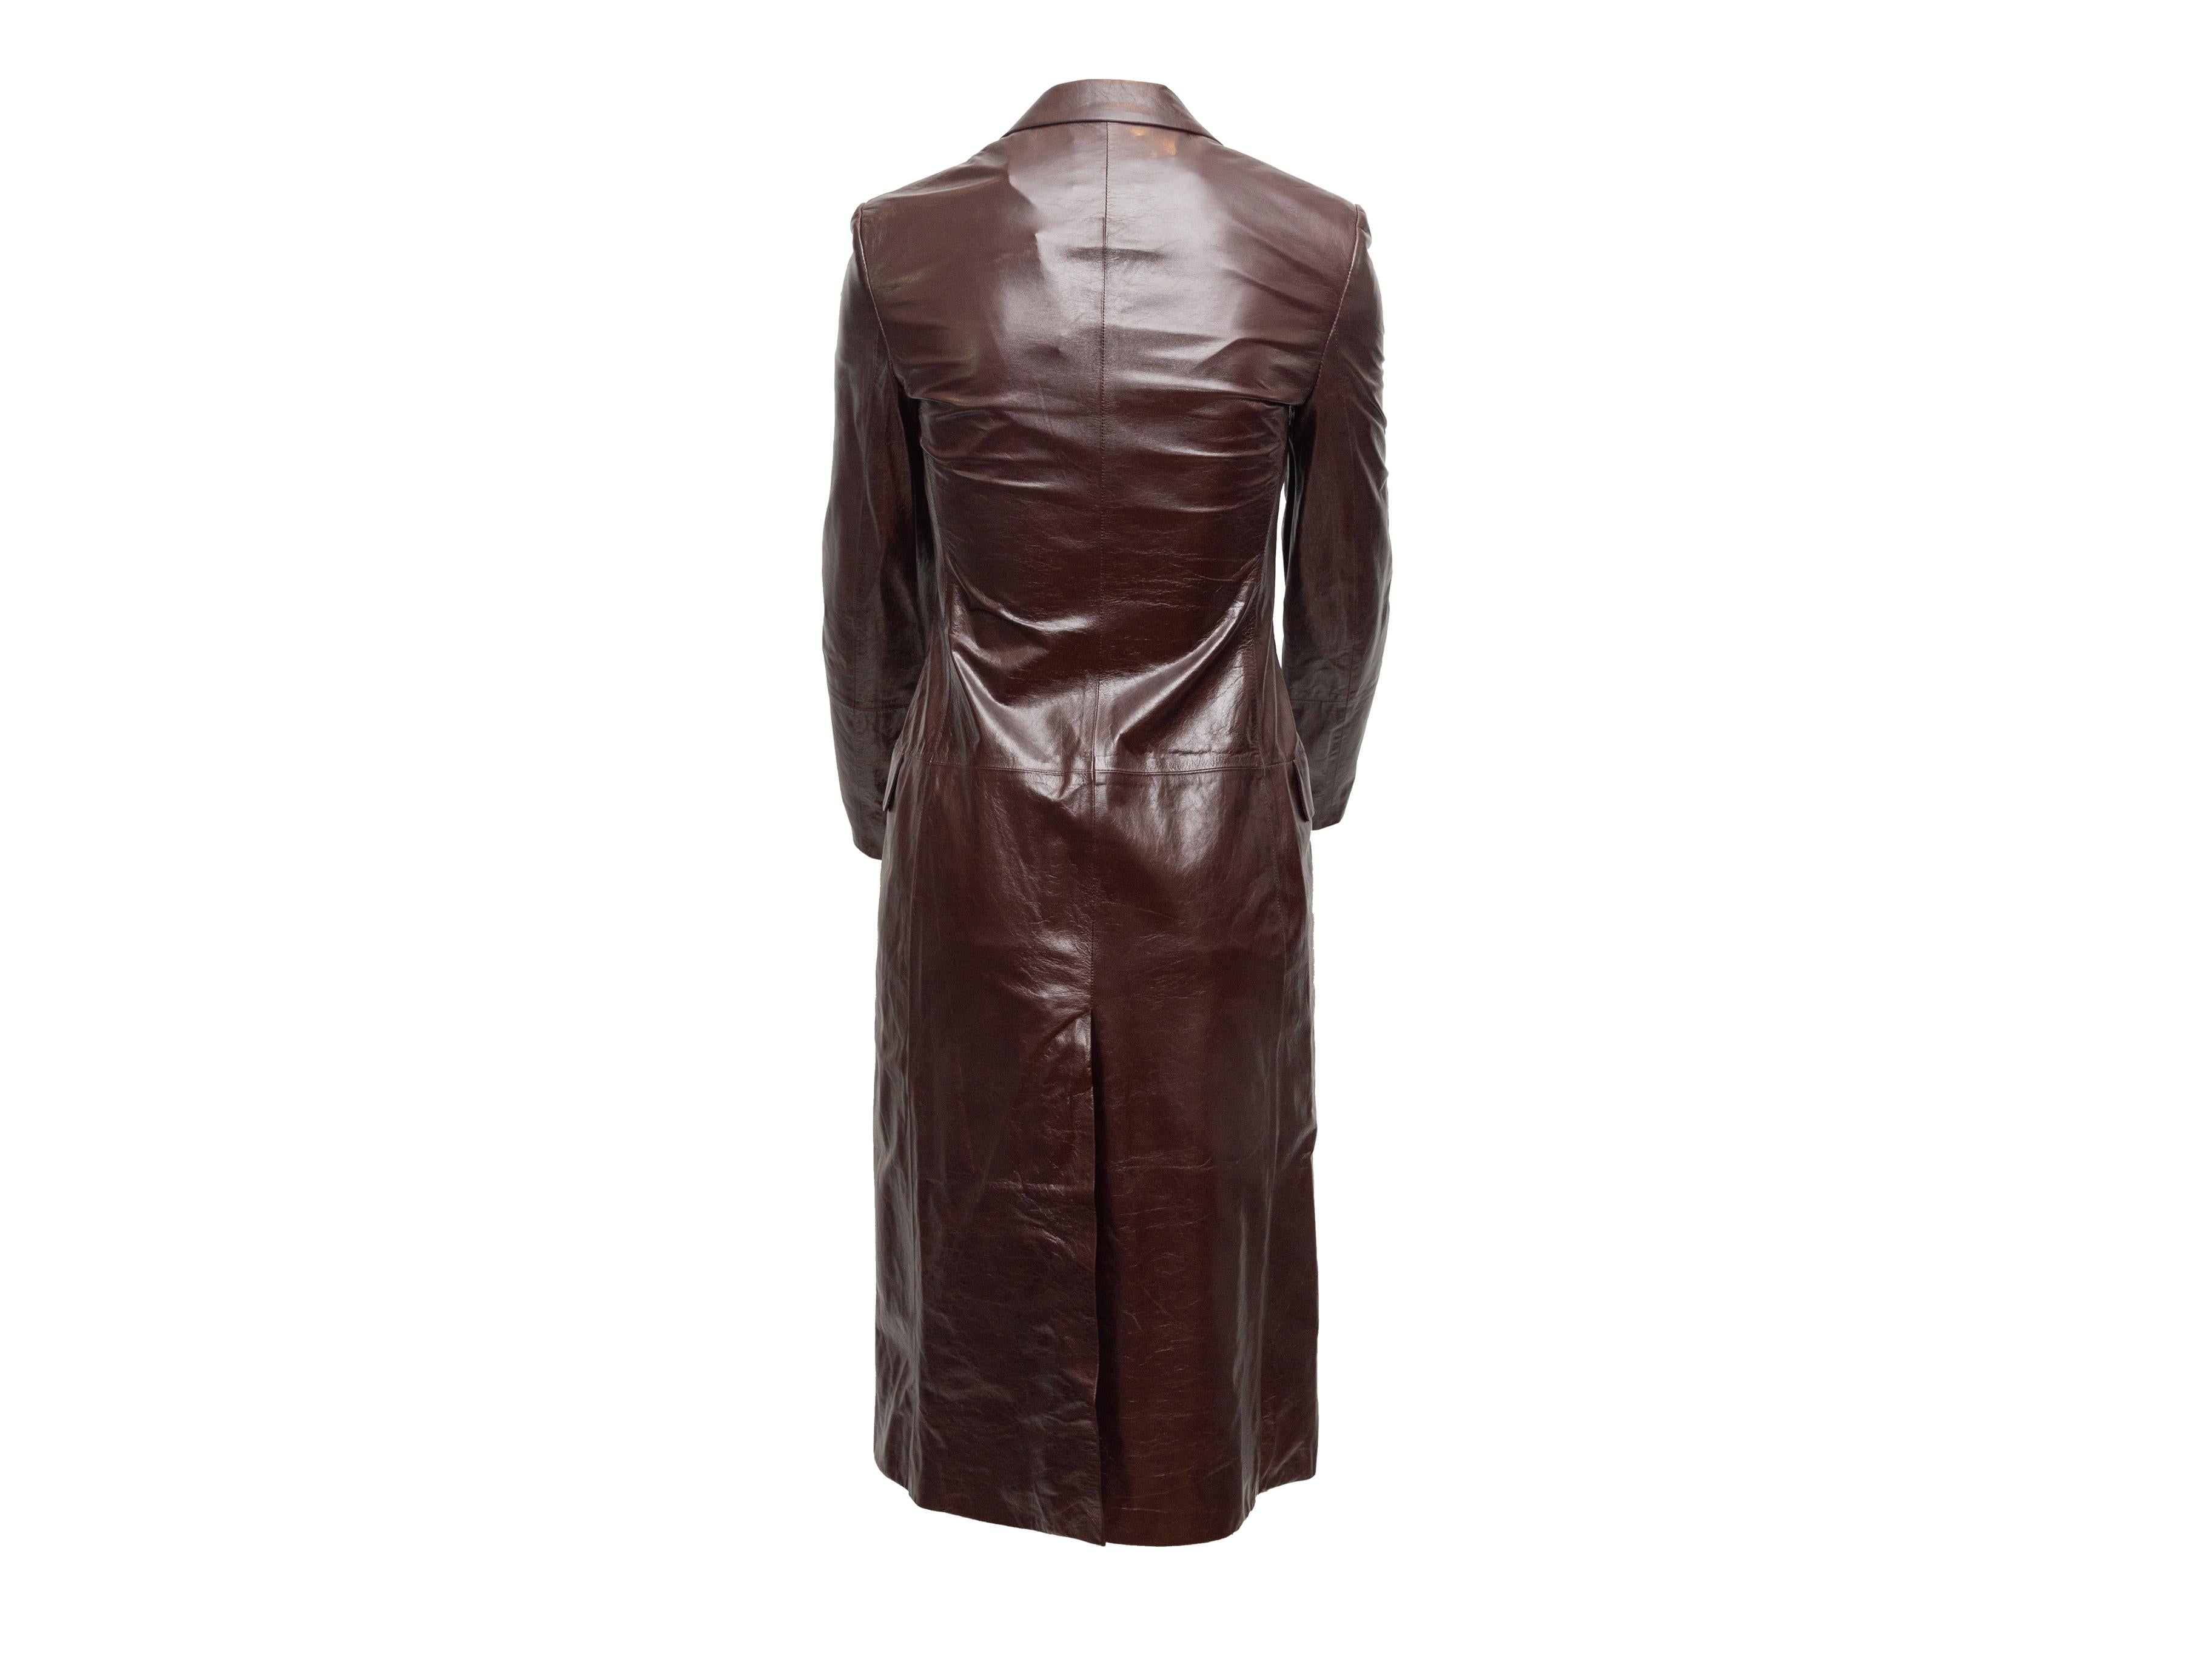 Product details: Dark brown long leather coat by Theory. Notched lapel. Dual hip pockets. Single button closure at front. 32